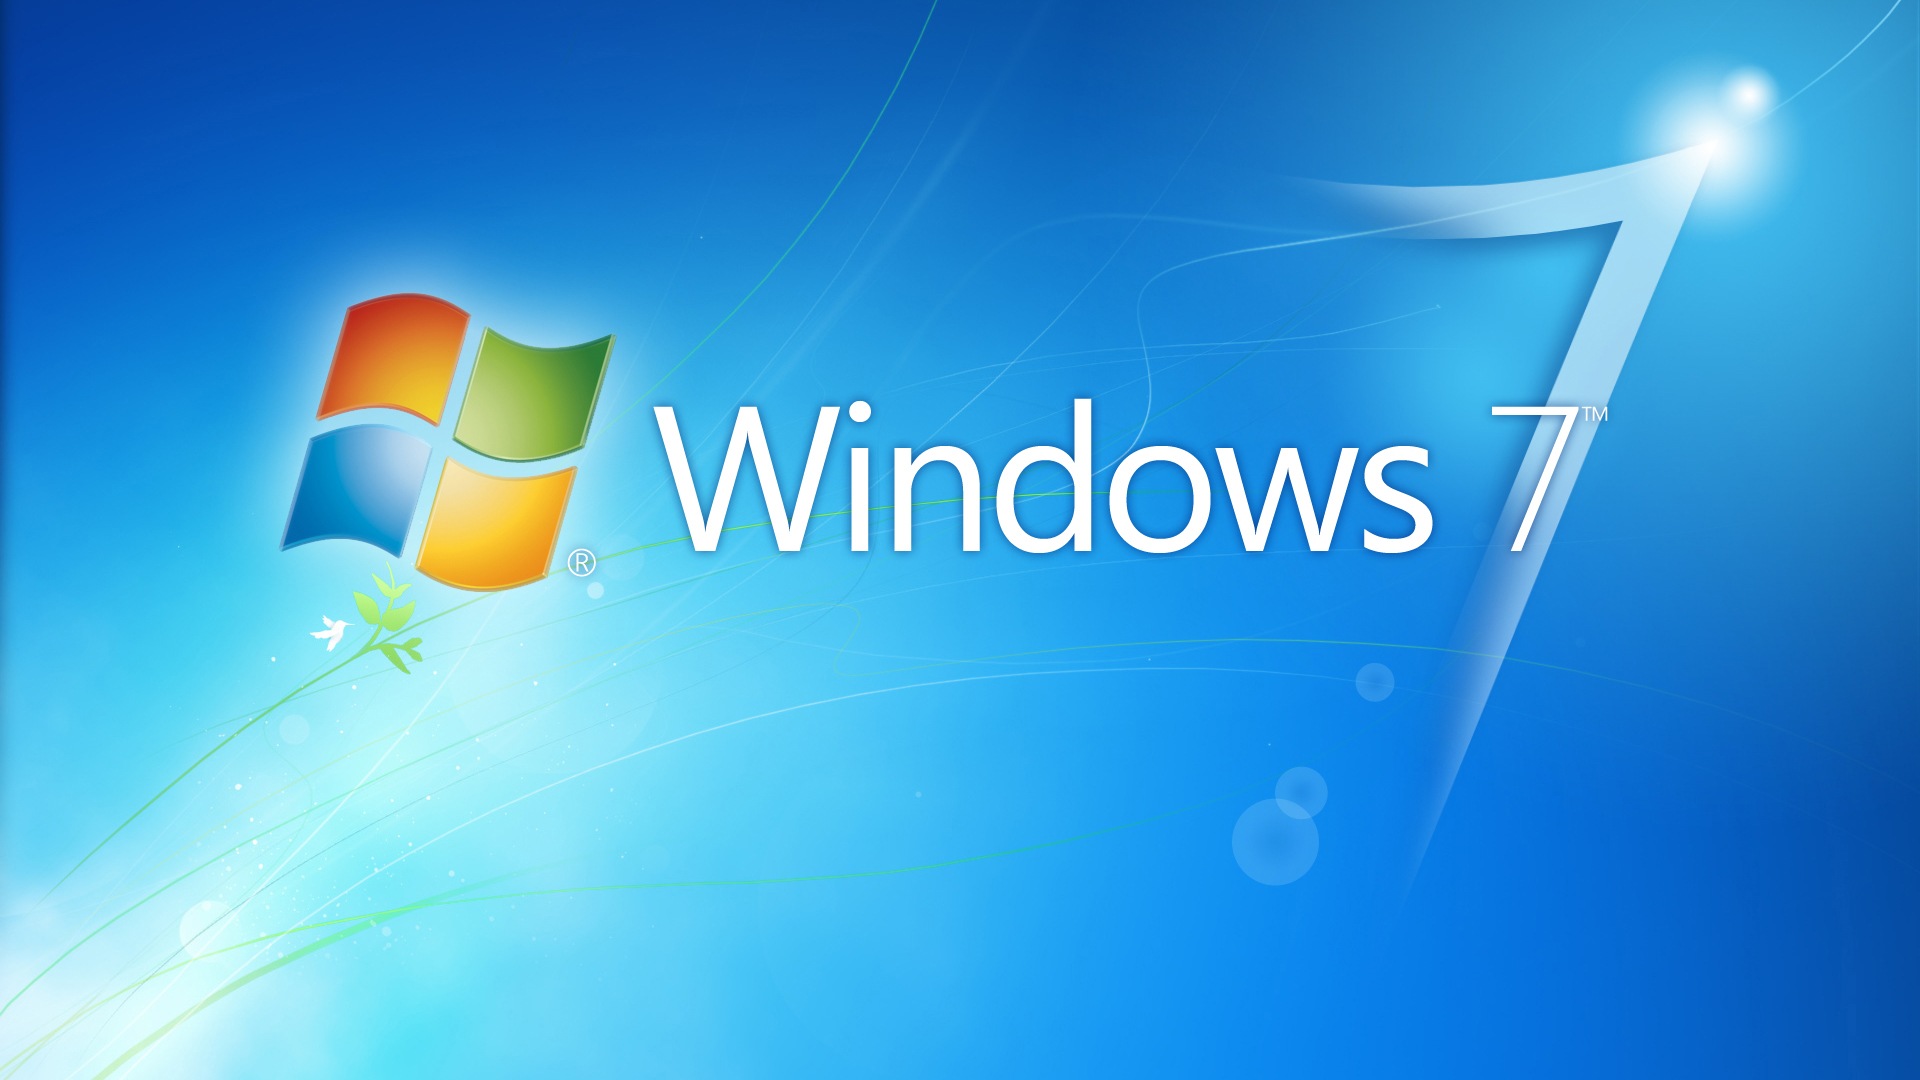 How to Install and Use Languages in Windows 7 Enterprise and Ultimate